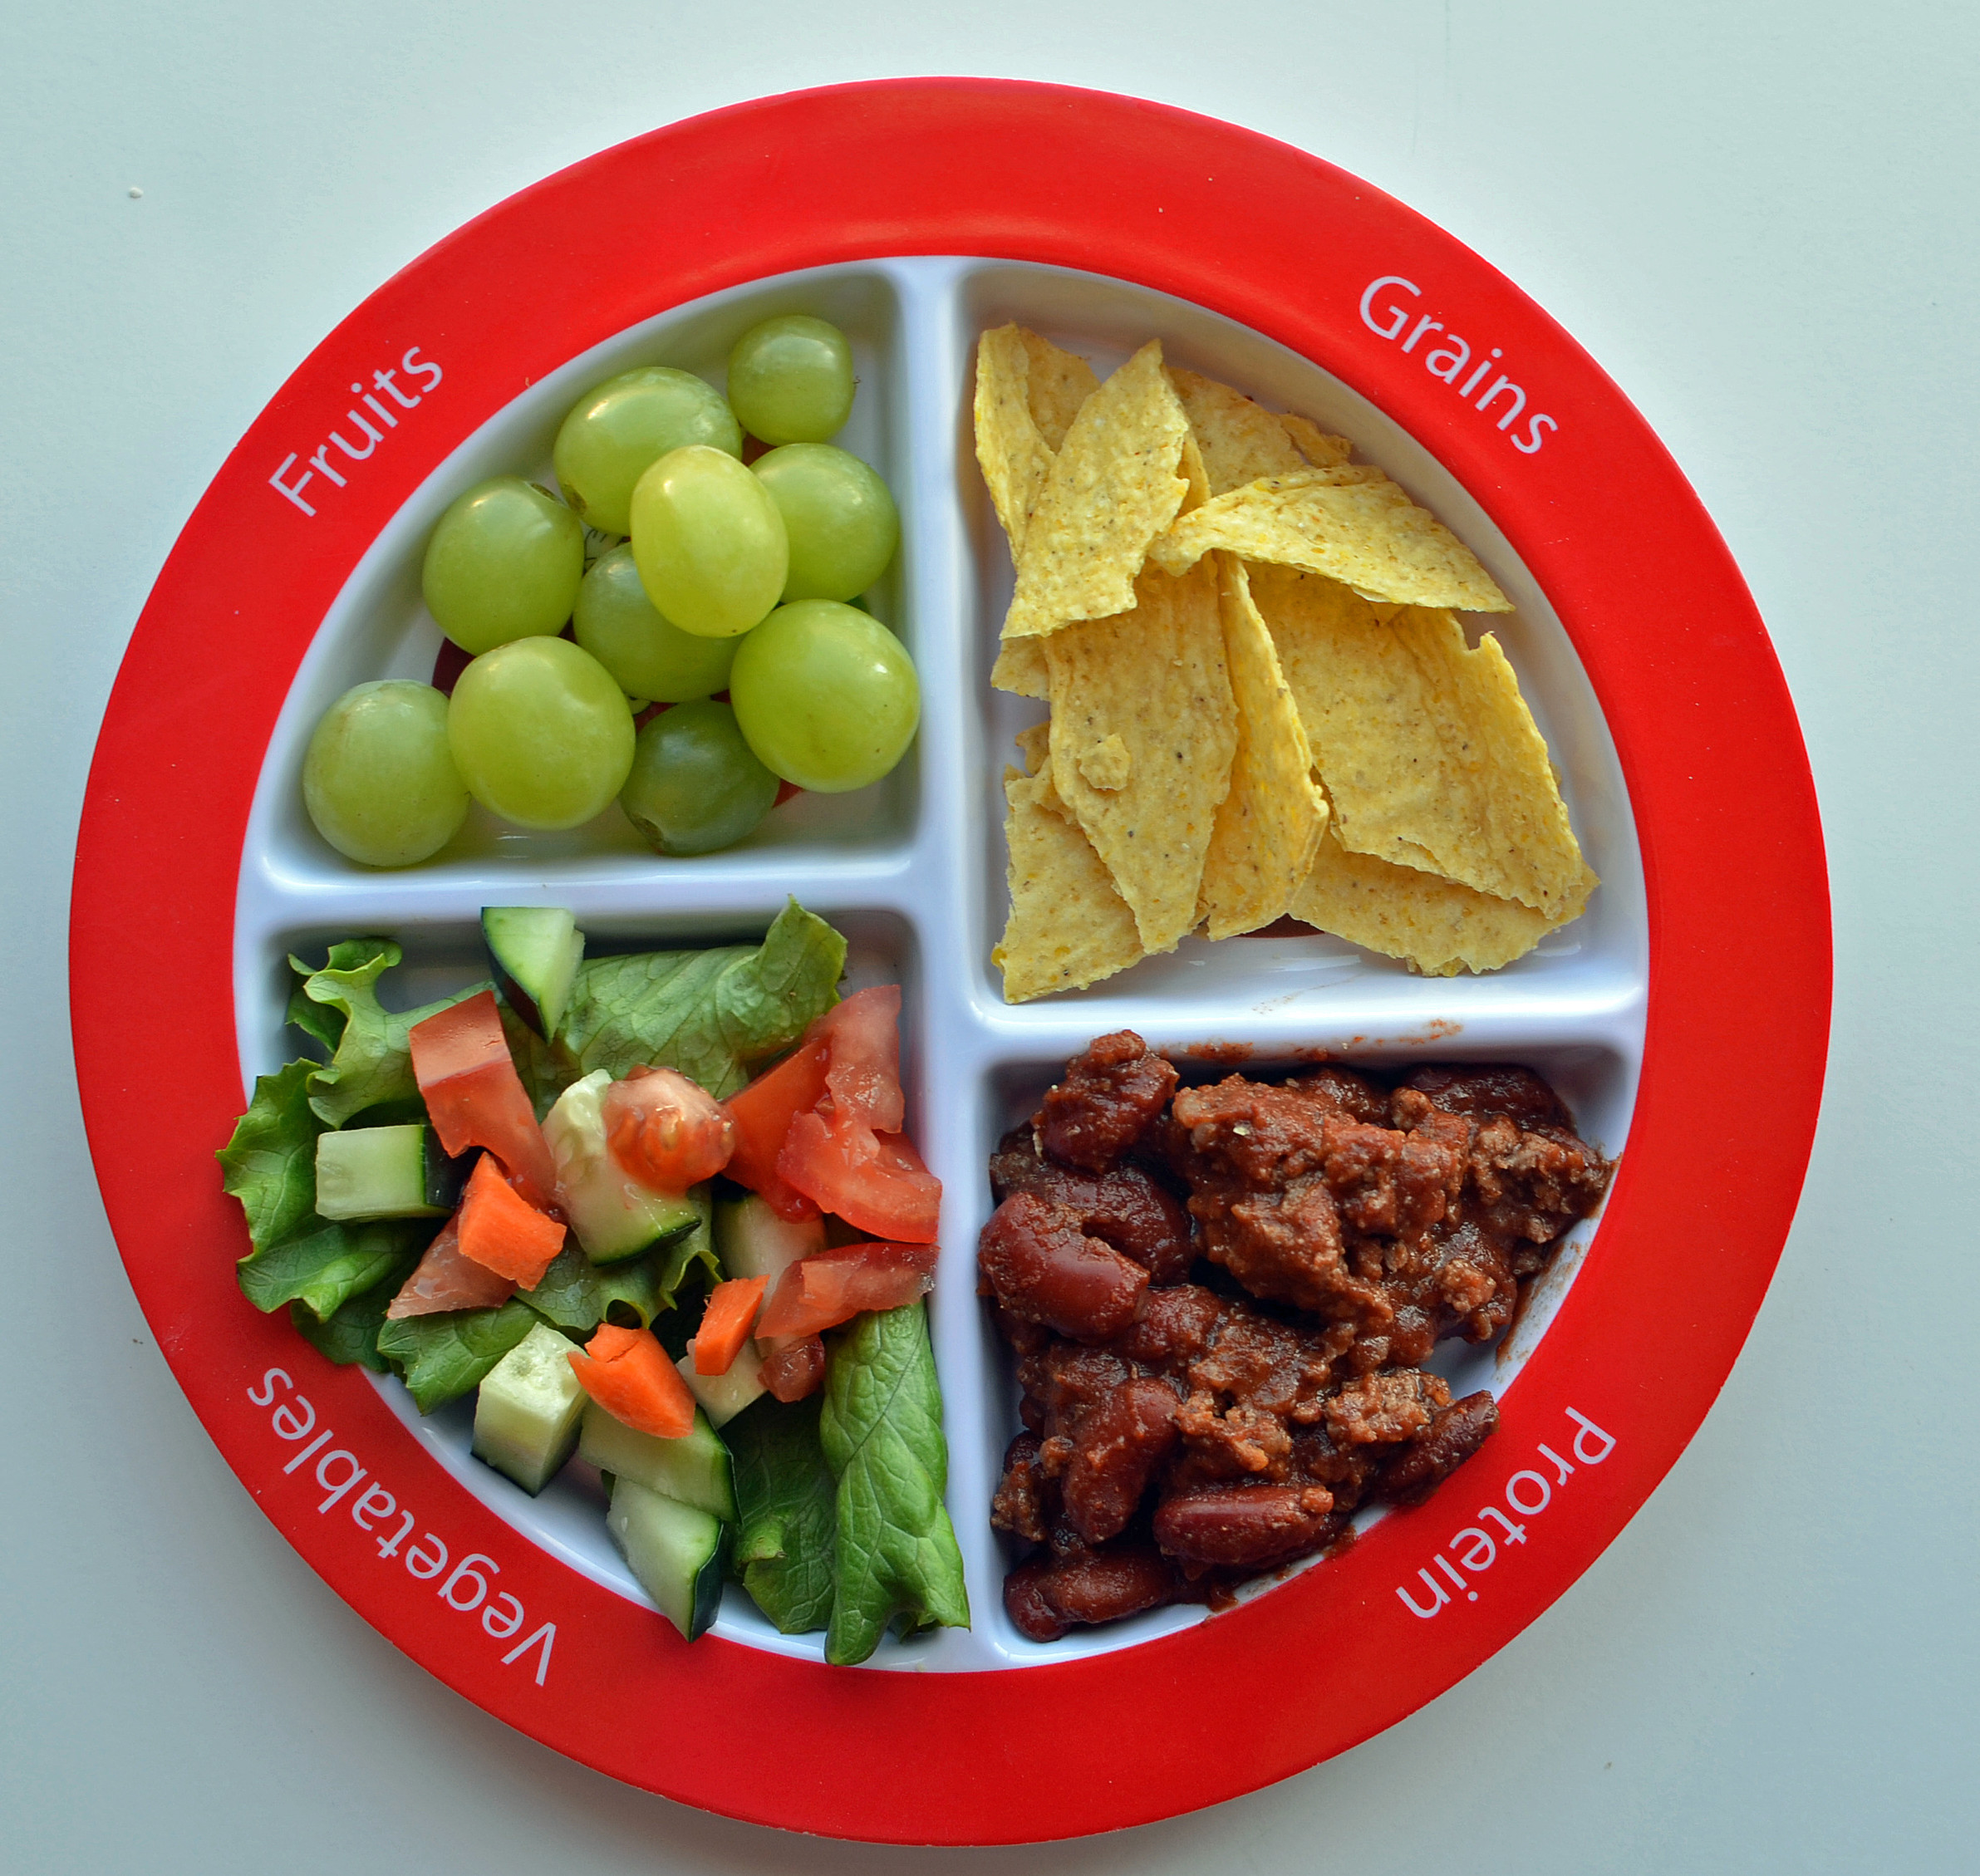 Healthy Dinners For Toddlers
 Guide to Toddler Portion Sizes